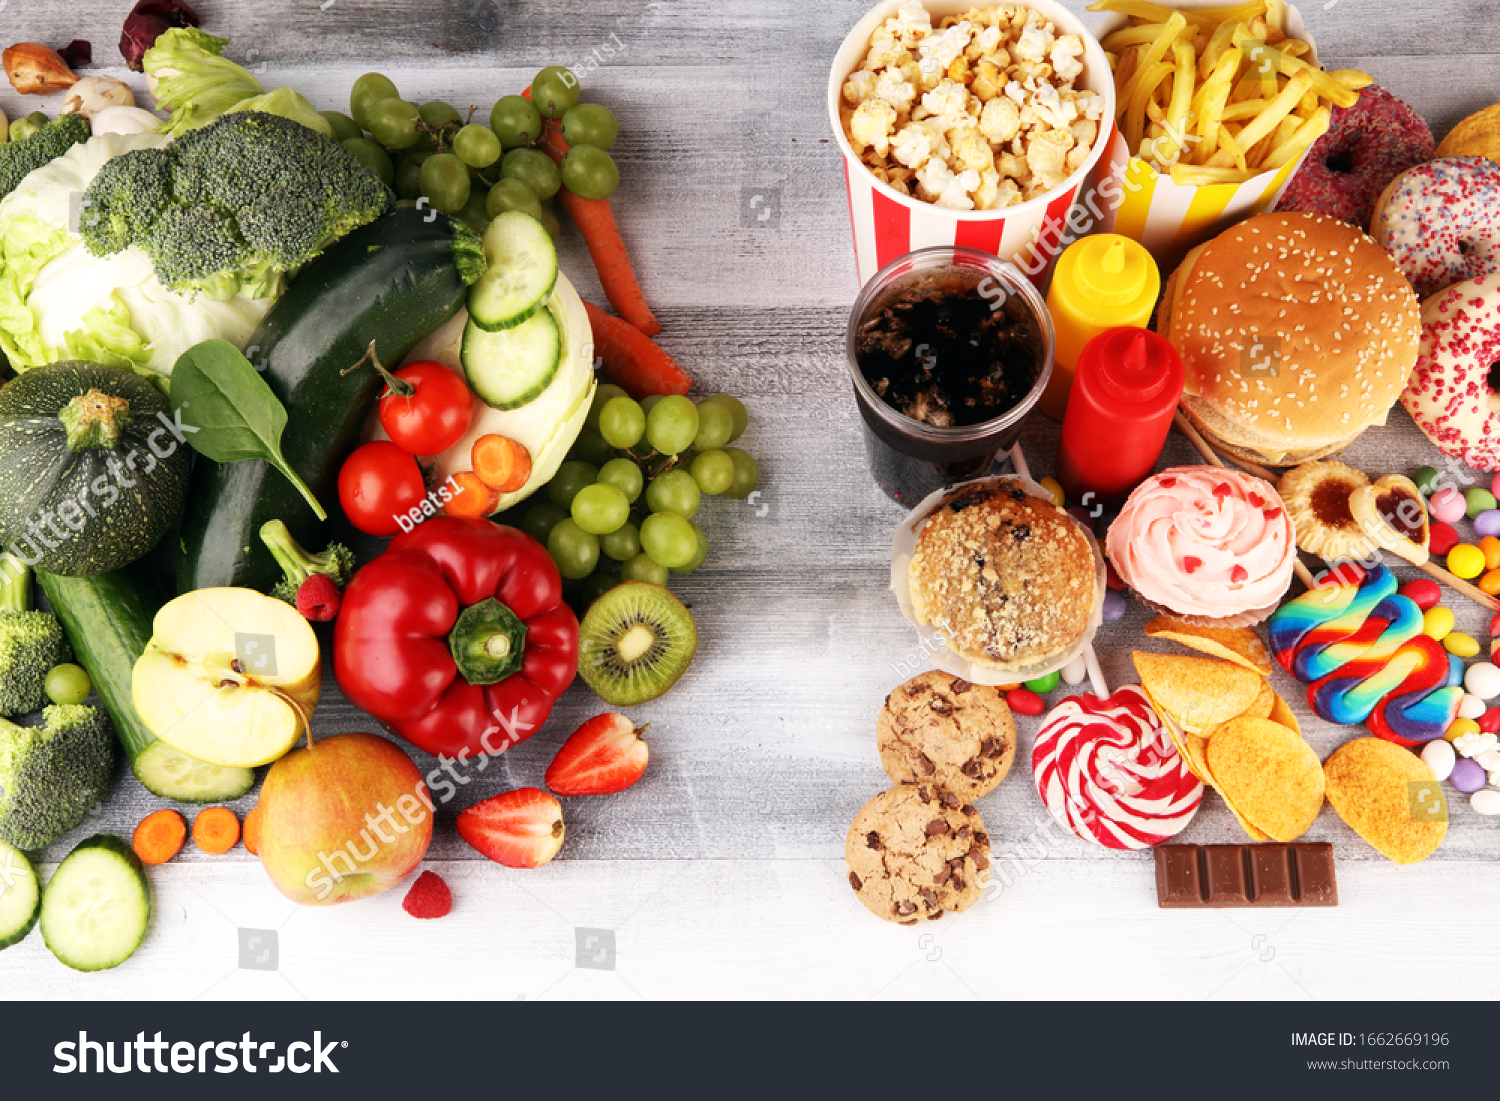 healthy or unhealthy food. Concept photo of healthy and unhealthy food. Fruits and vegetables vs donuts,sweets and burgers on table #1662669196